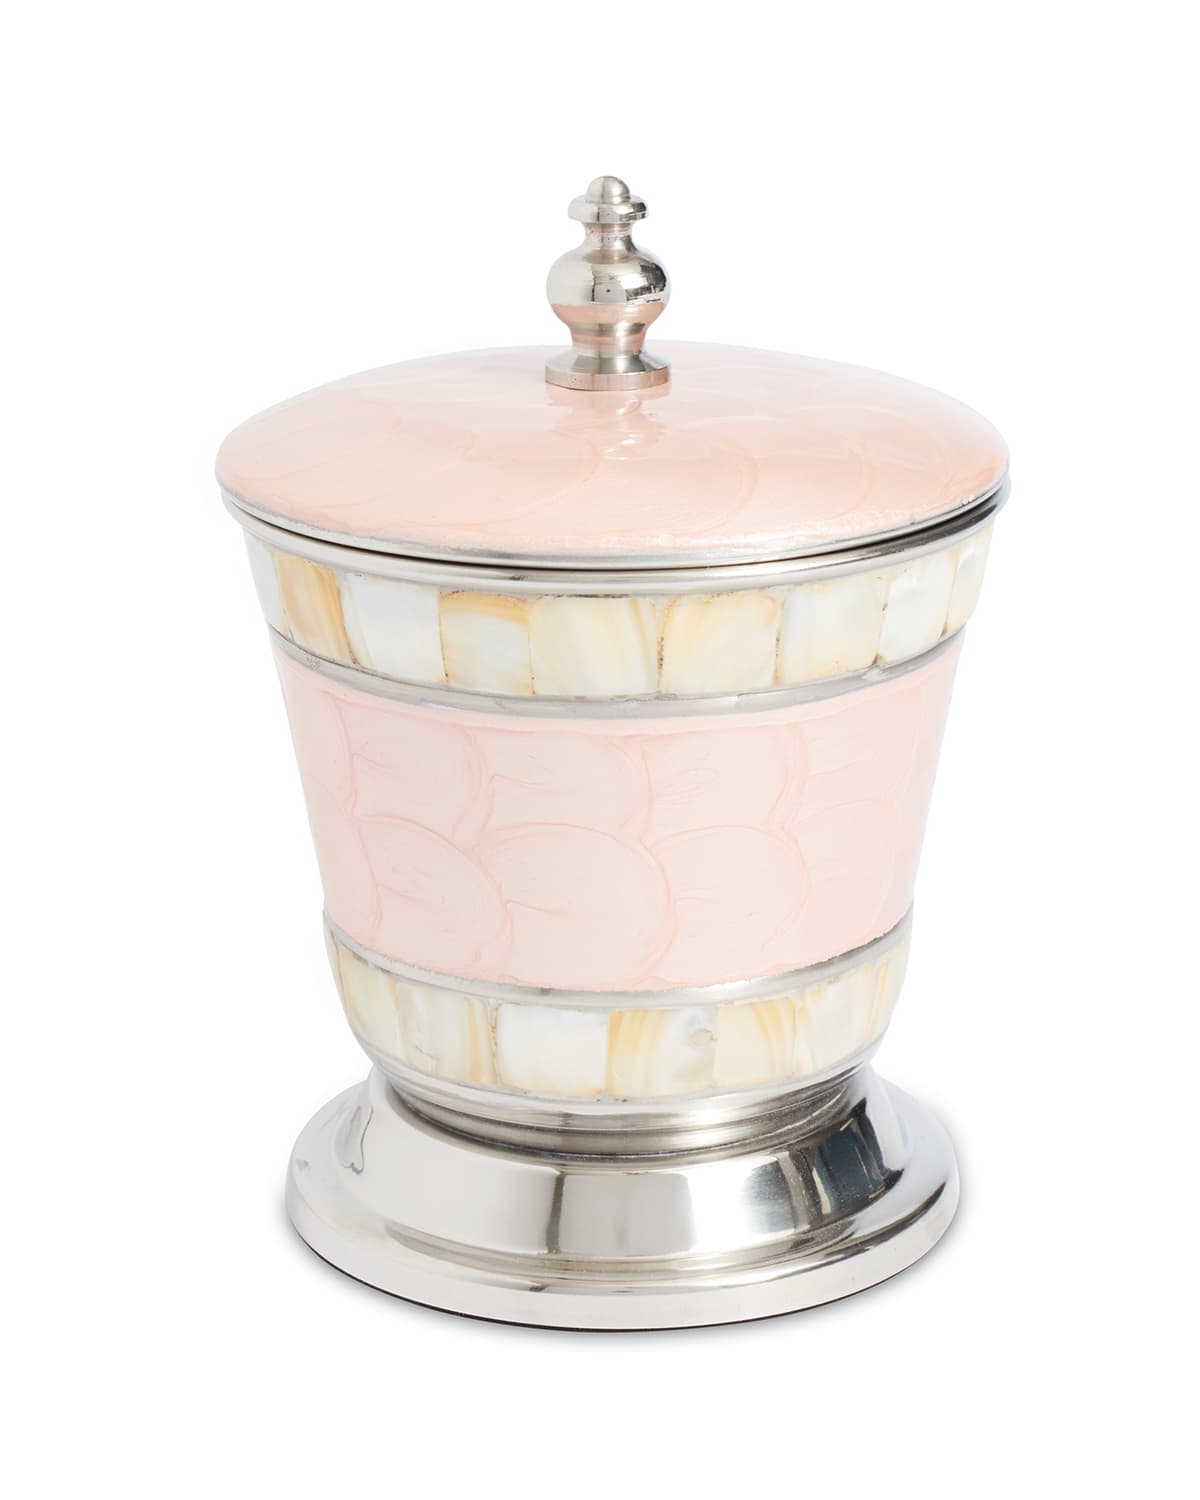 Image Julia Knight Classic 5.5" Covered Canister